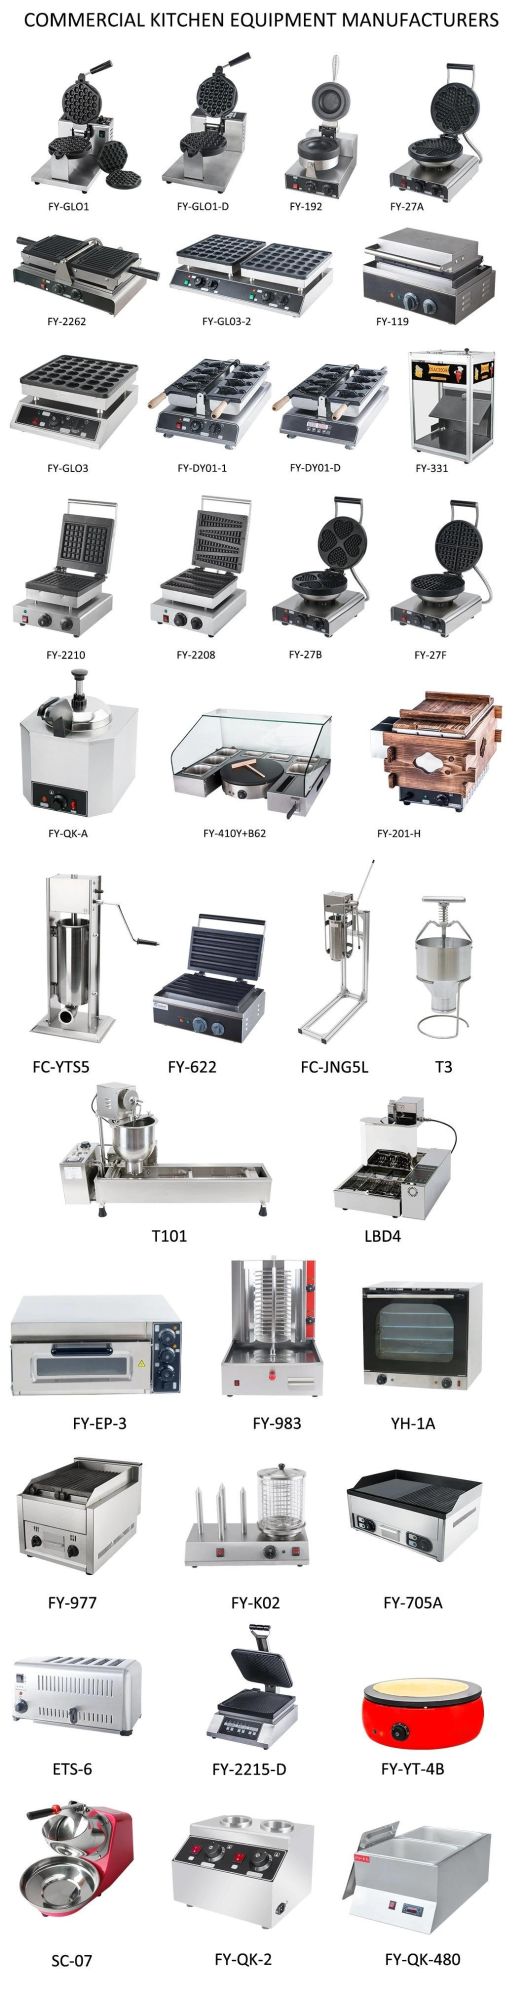 Hand Press Long Fries Machine Deep Fryer Soft Mashed Potato Food Grade Slicer French Fries Extruder with Ce